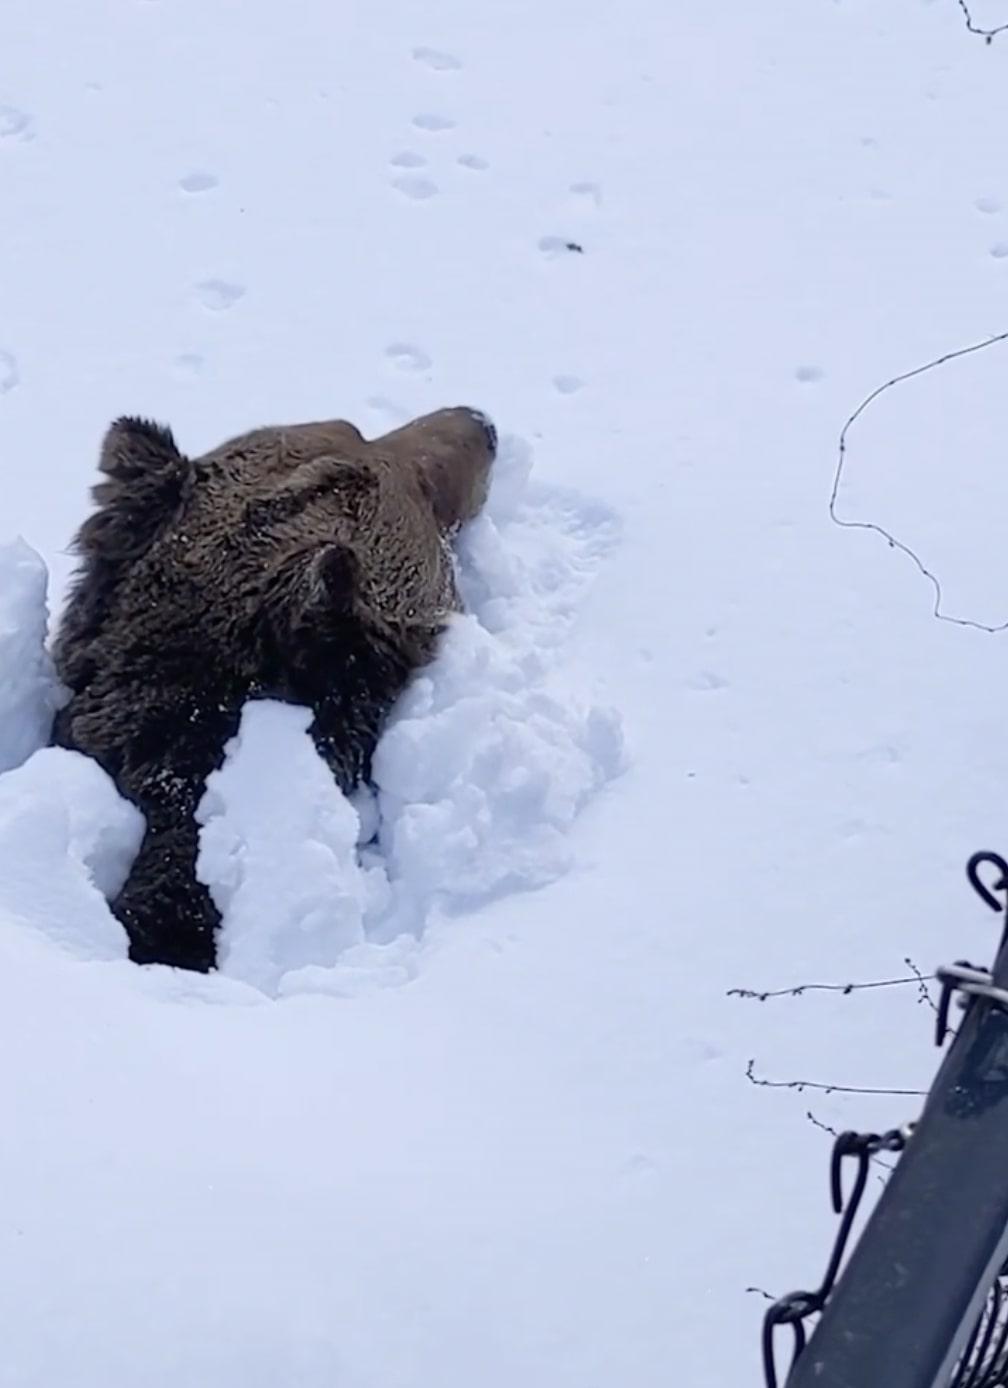 Boo, emerging from his den. (Courtesy of <a href="https://kickinghorseresort.com/">Kicking Horse Grizzly Bear Refuge</a>)